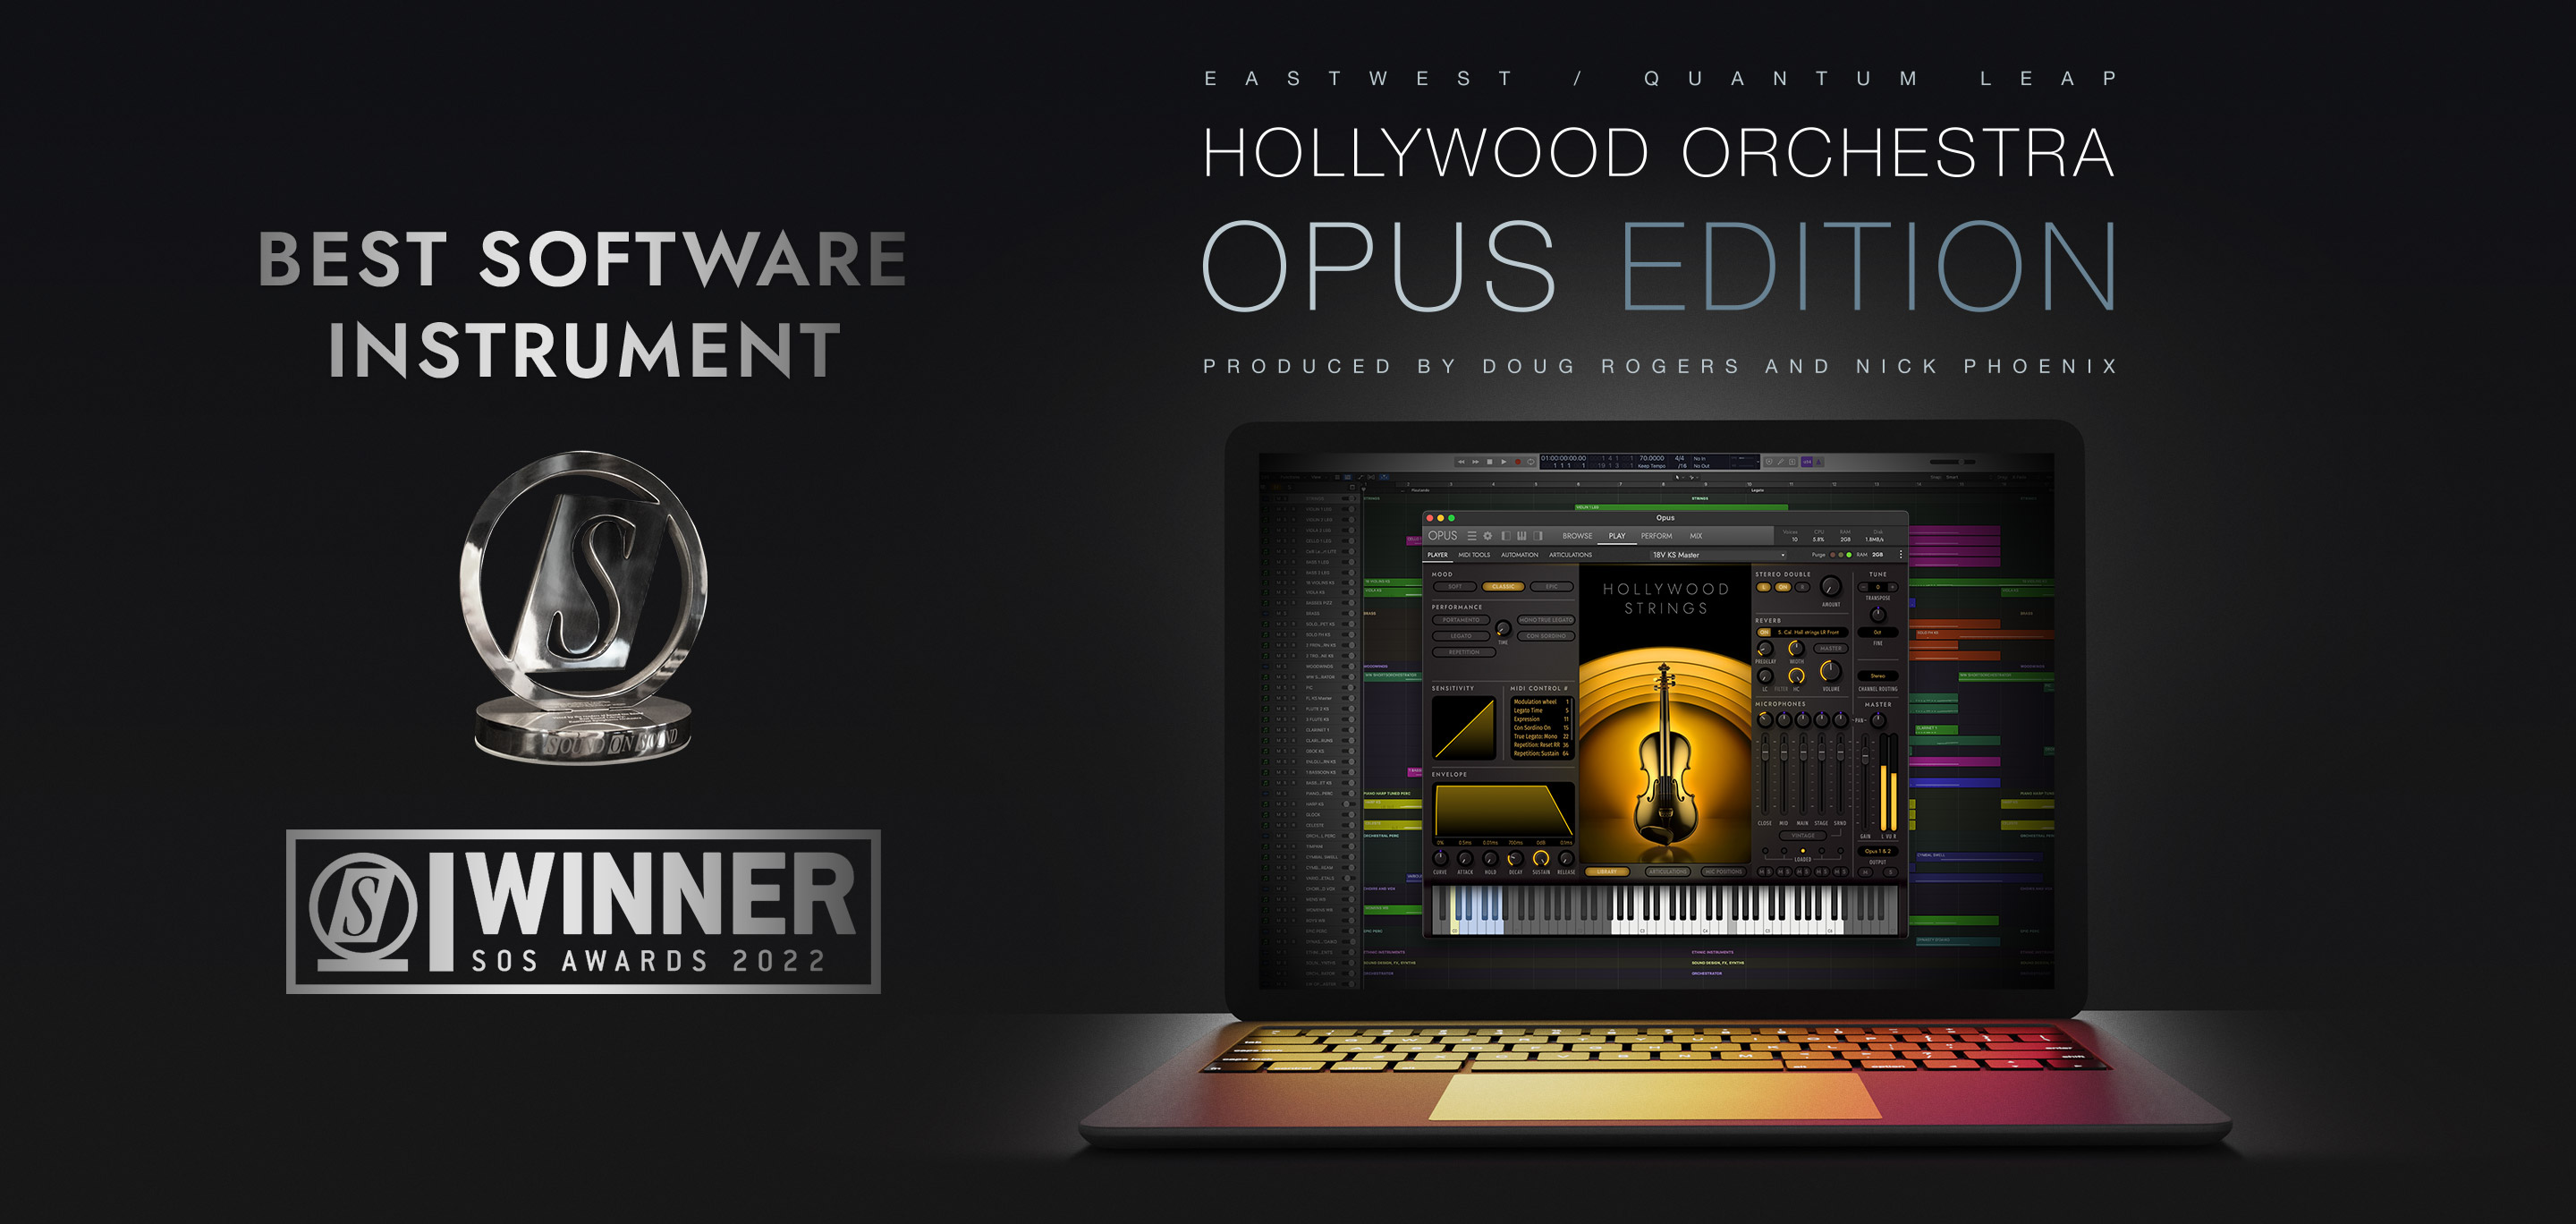 EastWest Hollywood Orchestra Opus Edition - SOS Award Winner - Best Software Instrument